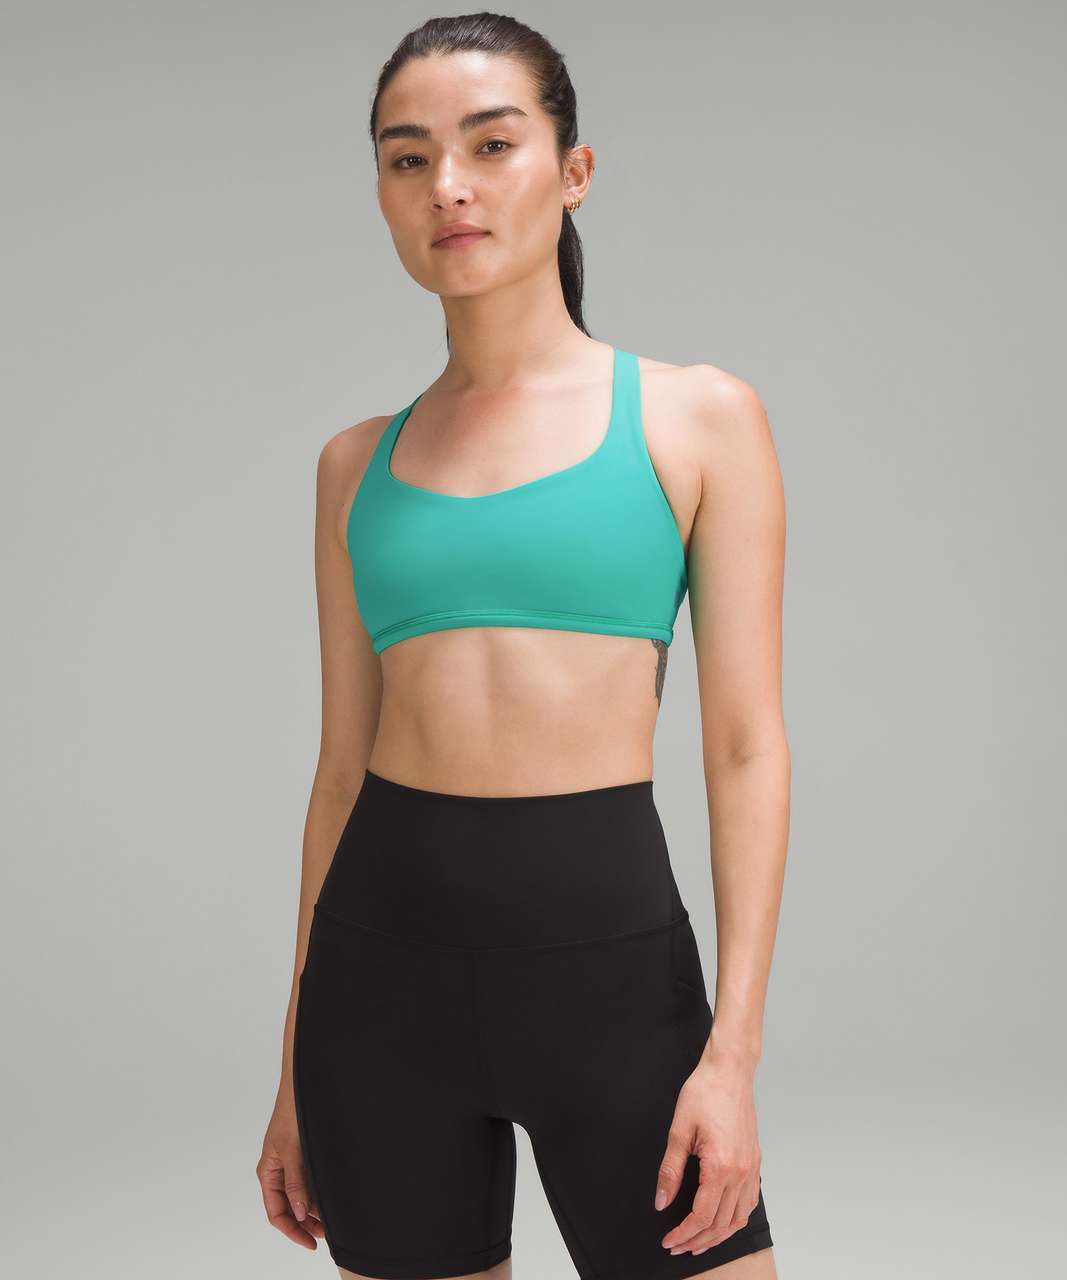 Bellwether Women's Size Small Green & Black Built in Bra Cycling Halter Top